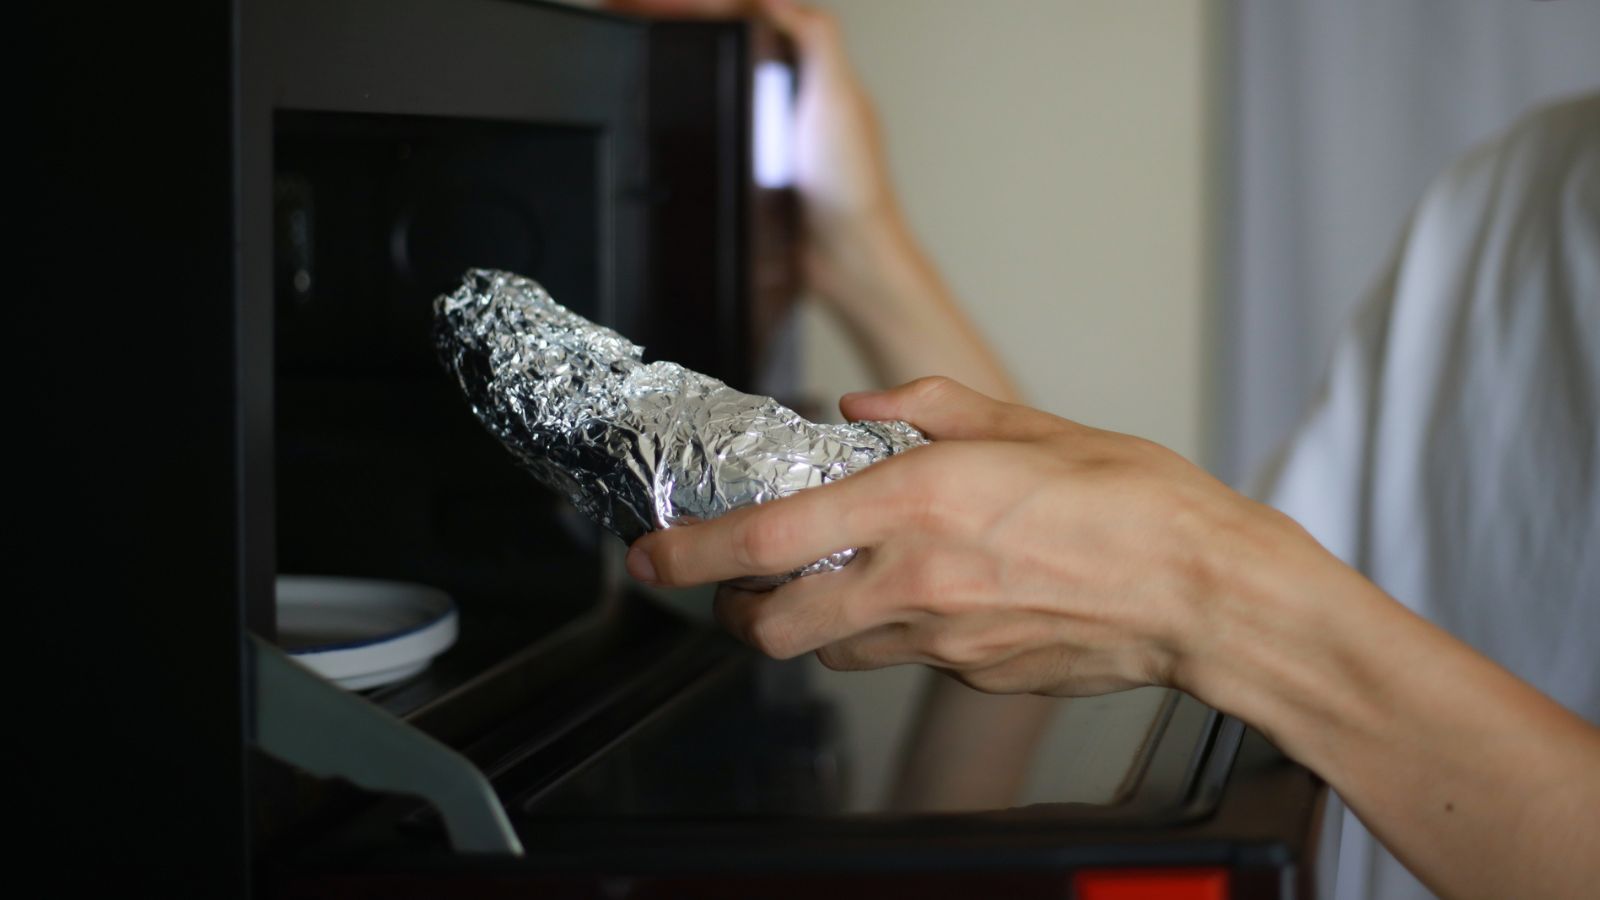 Can Aluminum Foil Go In The Oven?